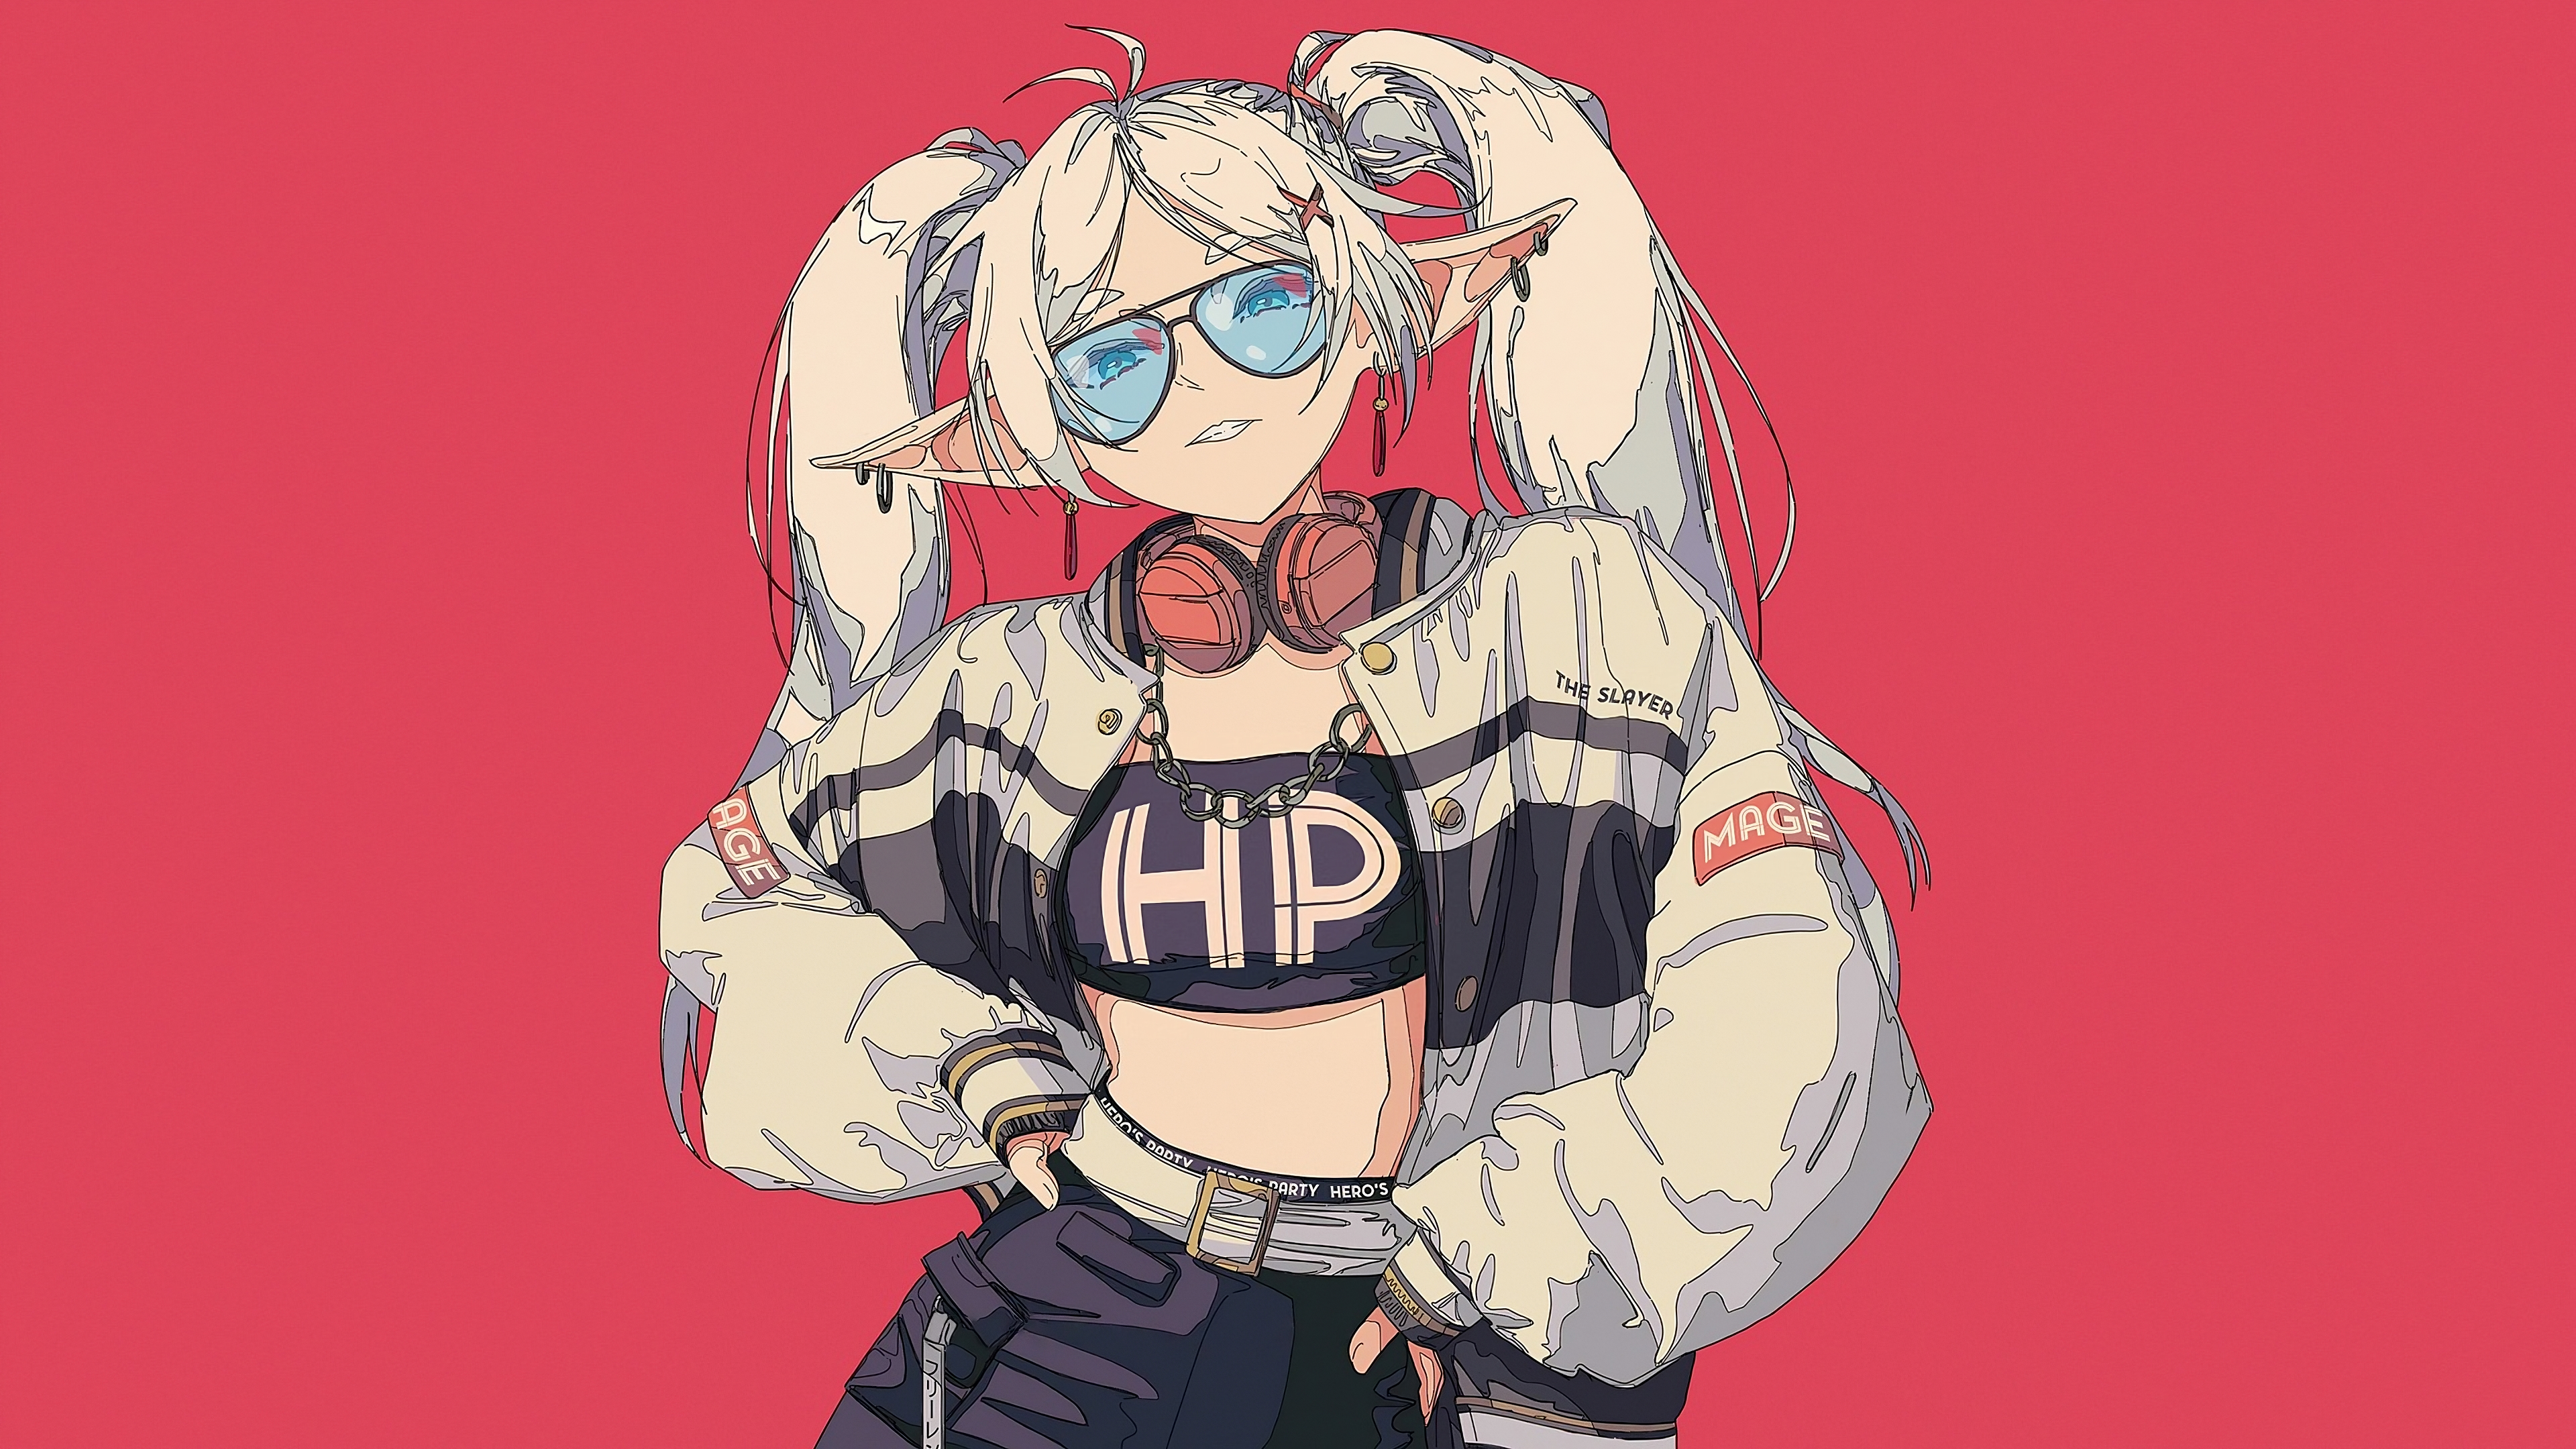 Anime 3840x2160 anime bare midriff anime girls headphones simple background Frieren Sousou No Frieren chains nest_virgo pointy ears looking at viewer blonde red background belly ear piercing blue eyes glasses women with glasses long hair hands on hips minimalism twintails open jacket jacket artwork